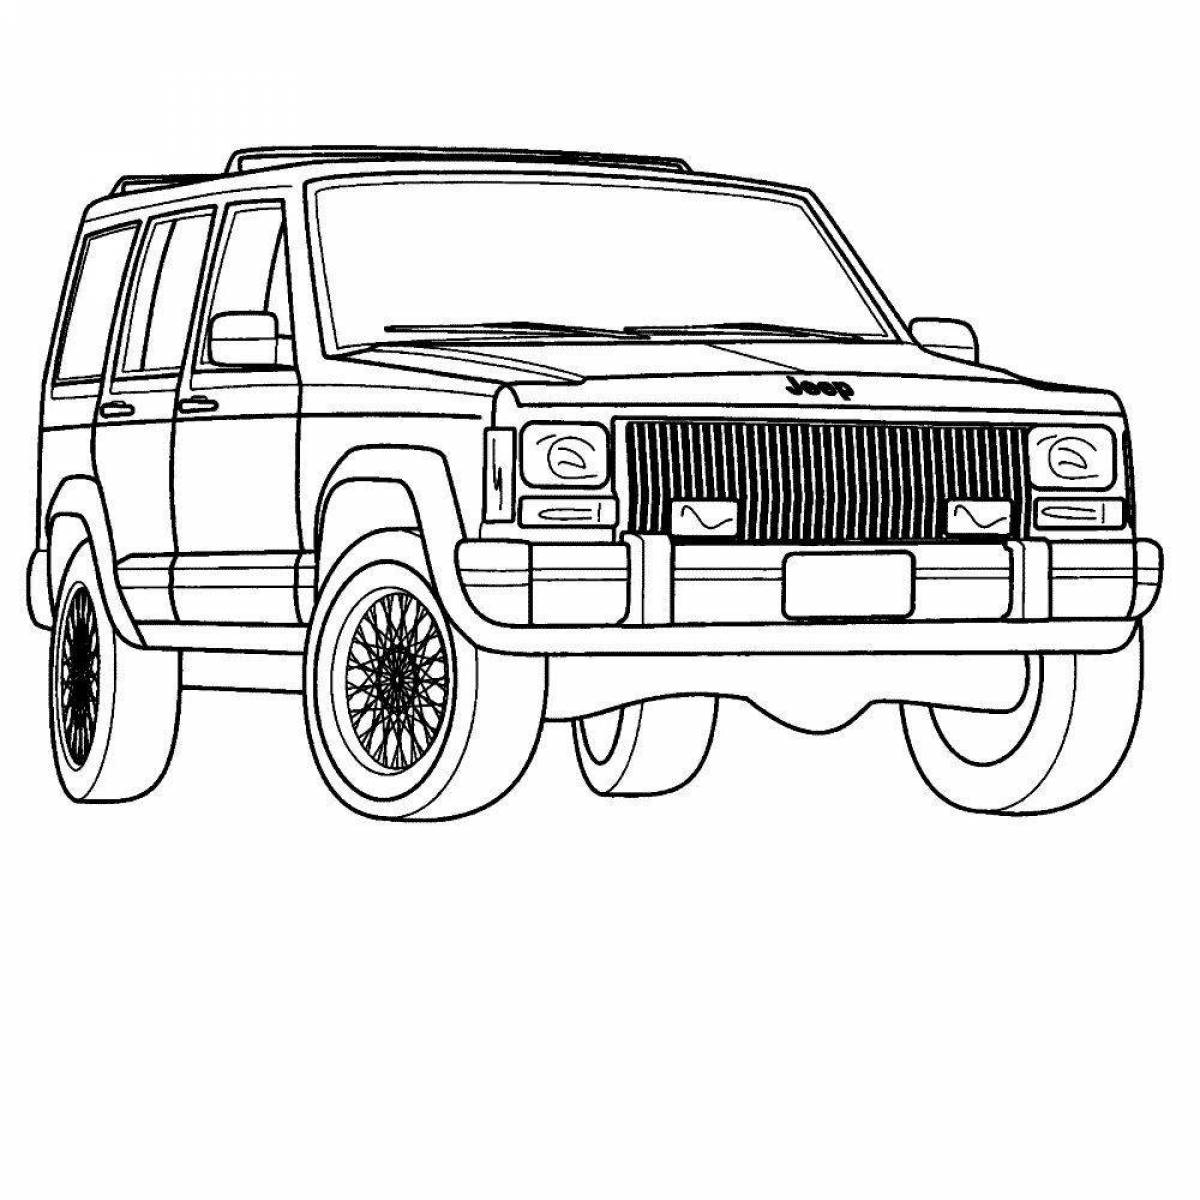 Coloring page majestic jeep grand cherokee